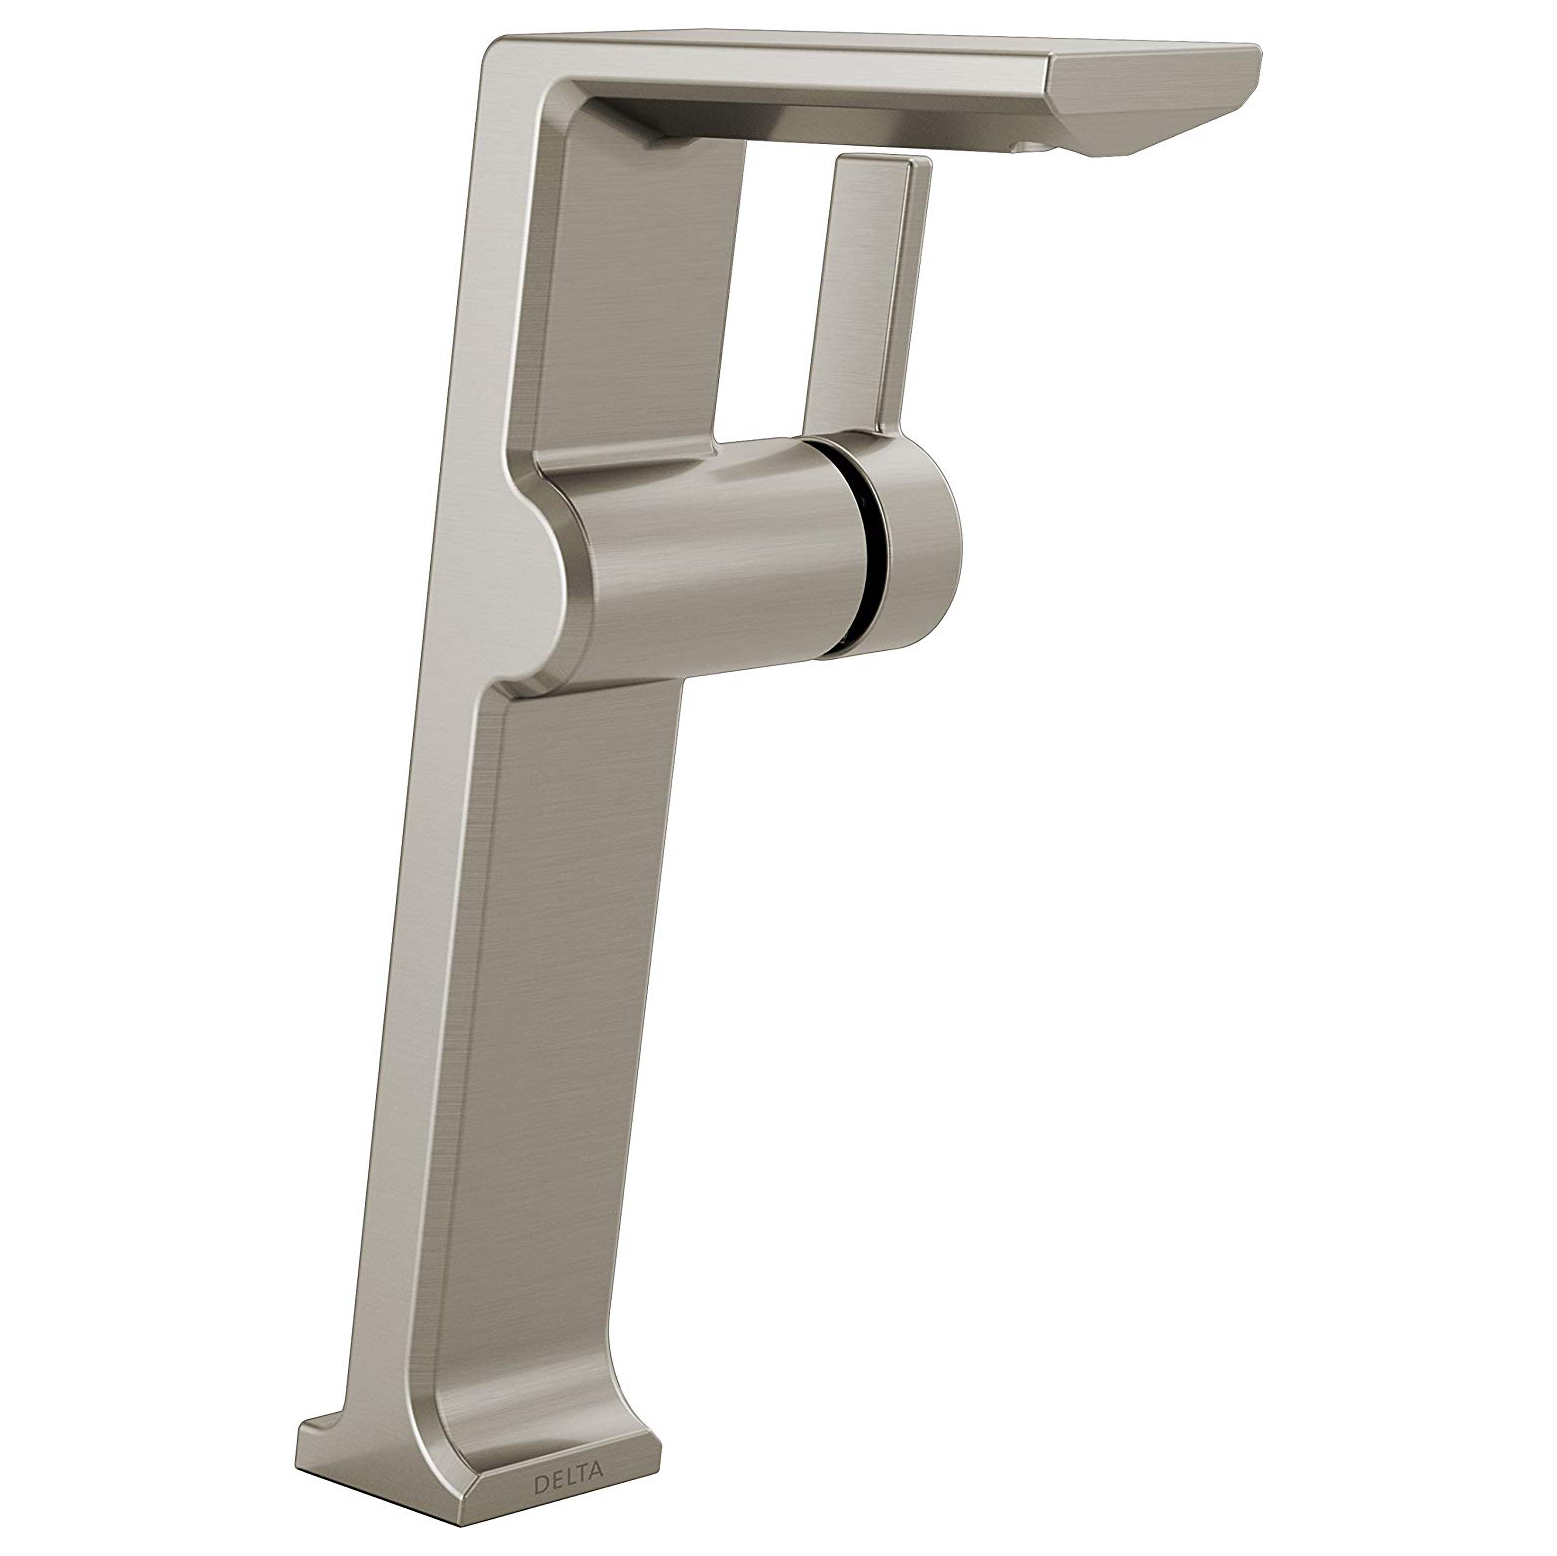 Pivotal Single Hole Vessel Bathroom Faucet in Stainless